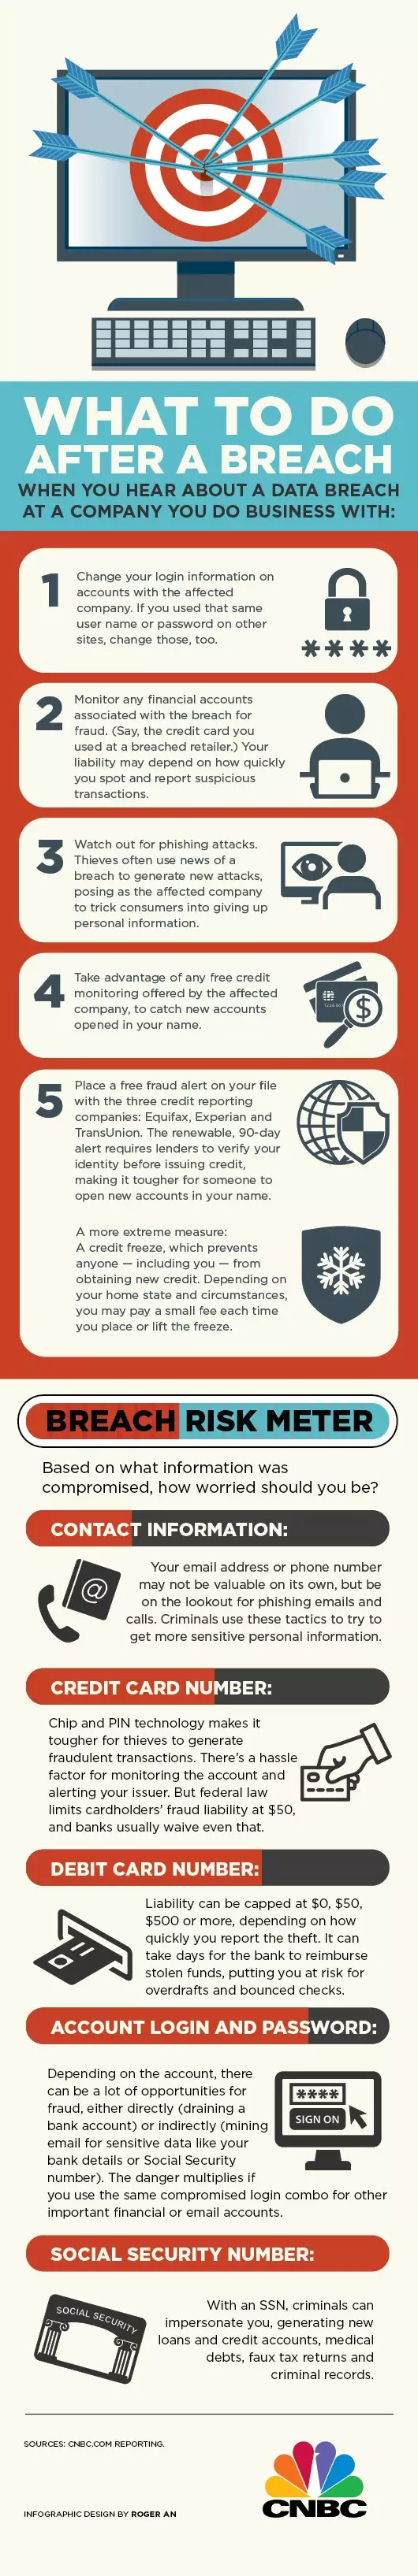 What to do After a Data Breach